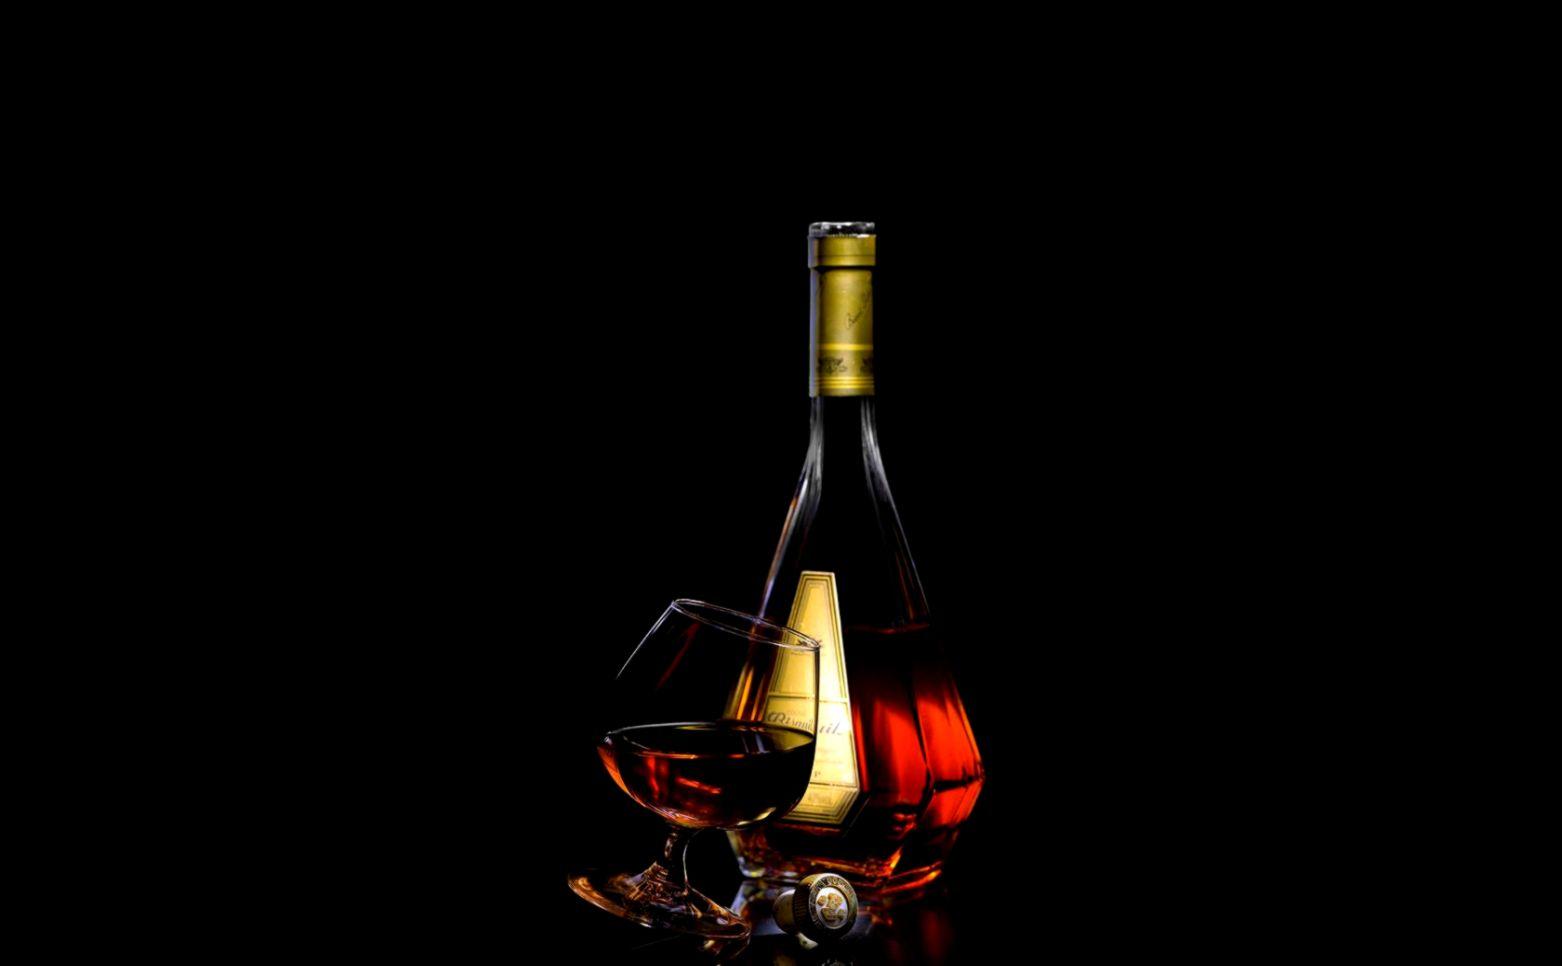 Alcohol In The Glass Wallpaper. All in One Wallpaper